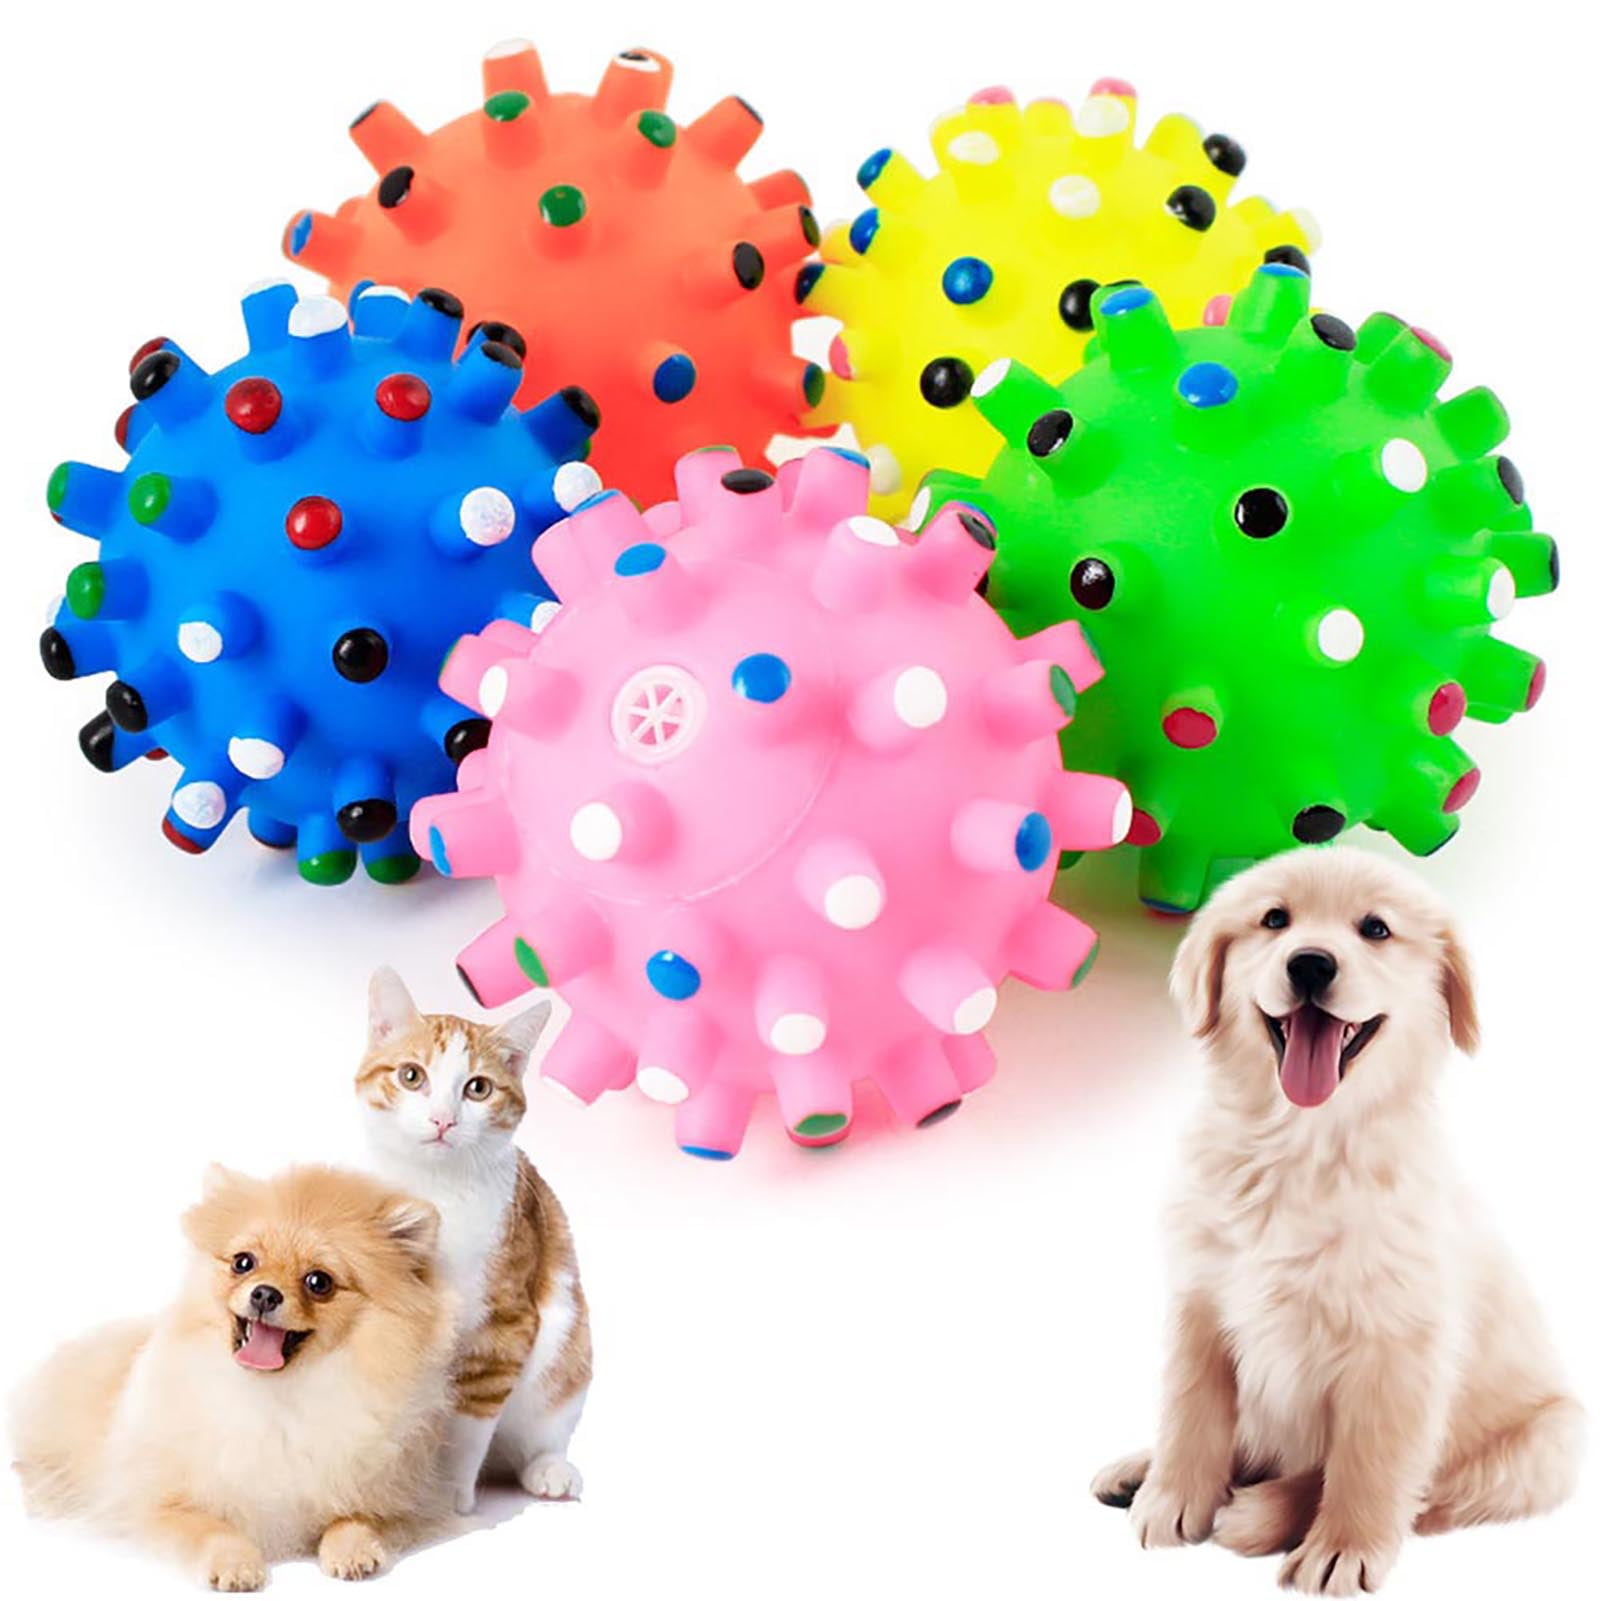 balacoo 4 Pcs tearribles Pull Apart Dog Toy Carrot Dog Toy Dog Squeaky Toys  Dog Balls for Large Dogs Dog Toy Ball Squirrel Toy Dog bark Ball chew Toys